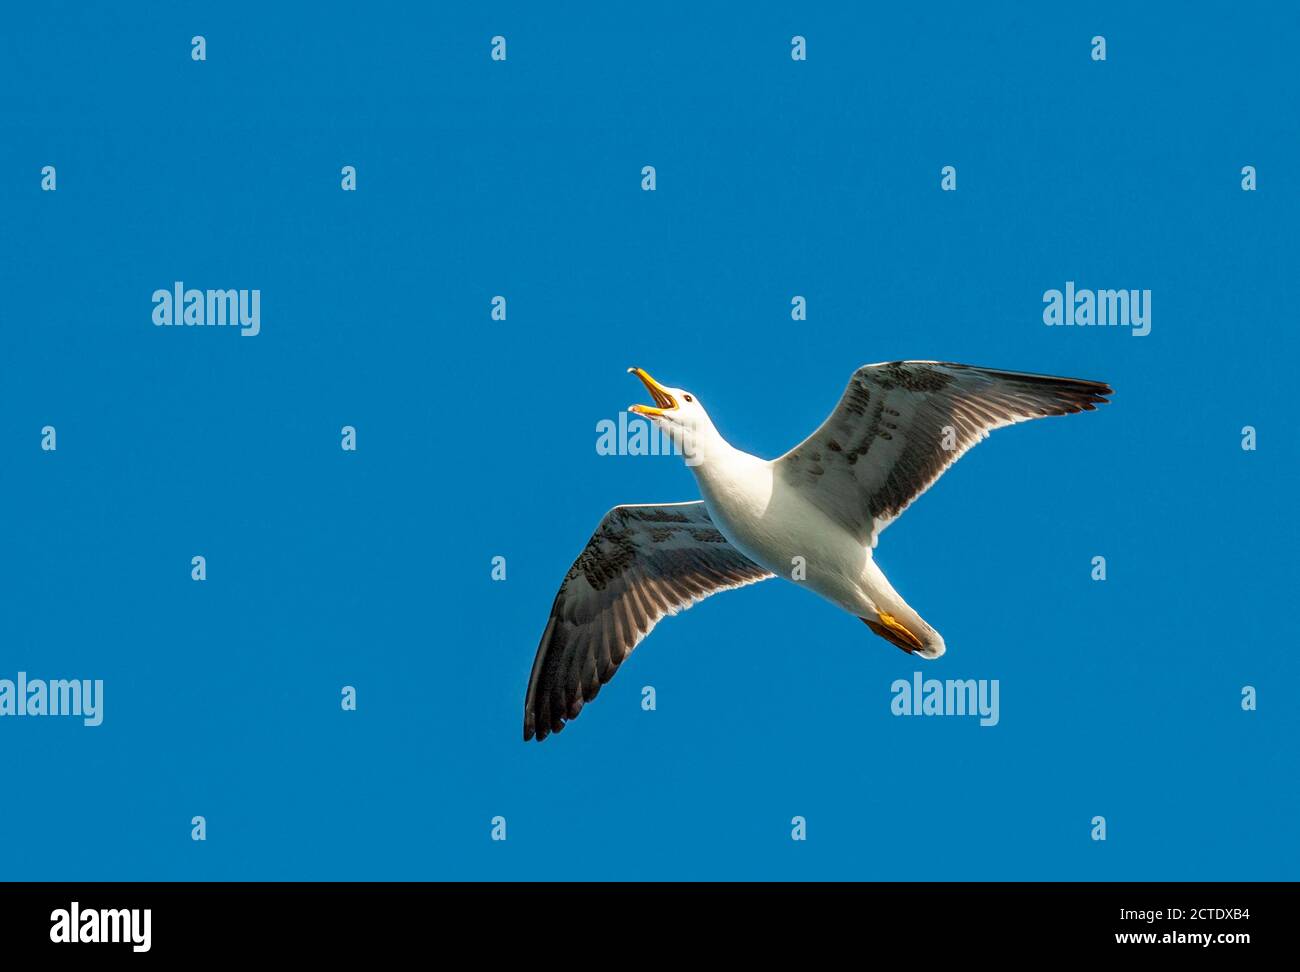 lesser black-backed gull (Larus fuscus), Immature in flight, seen from below, calling loudly, Netherlands, Texel Stock Photo